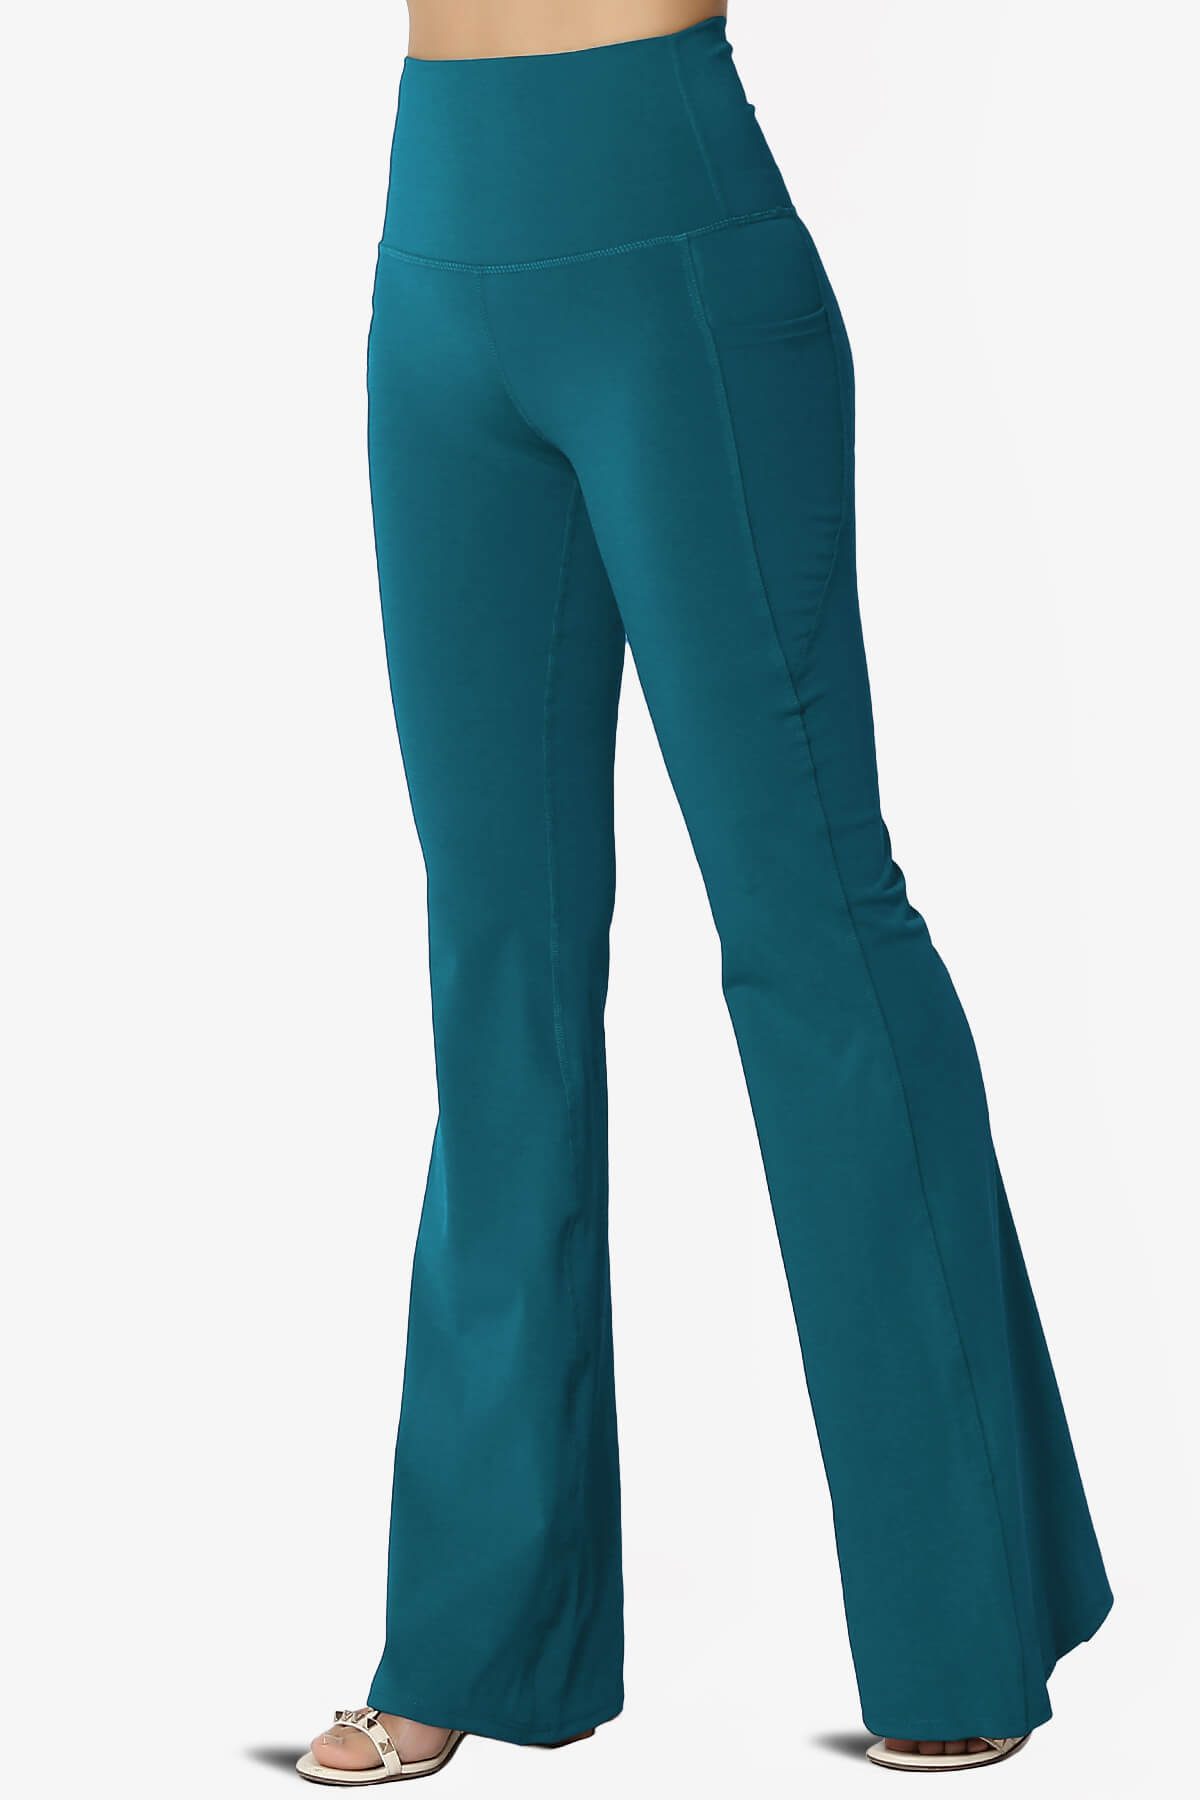 Load image into Gallery viewer, Gemma Athletic Pocket Flare Yoga Pants TEAL_3
